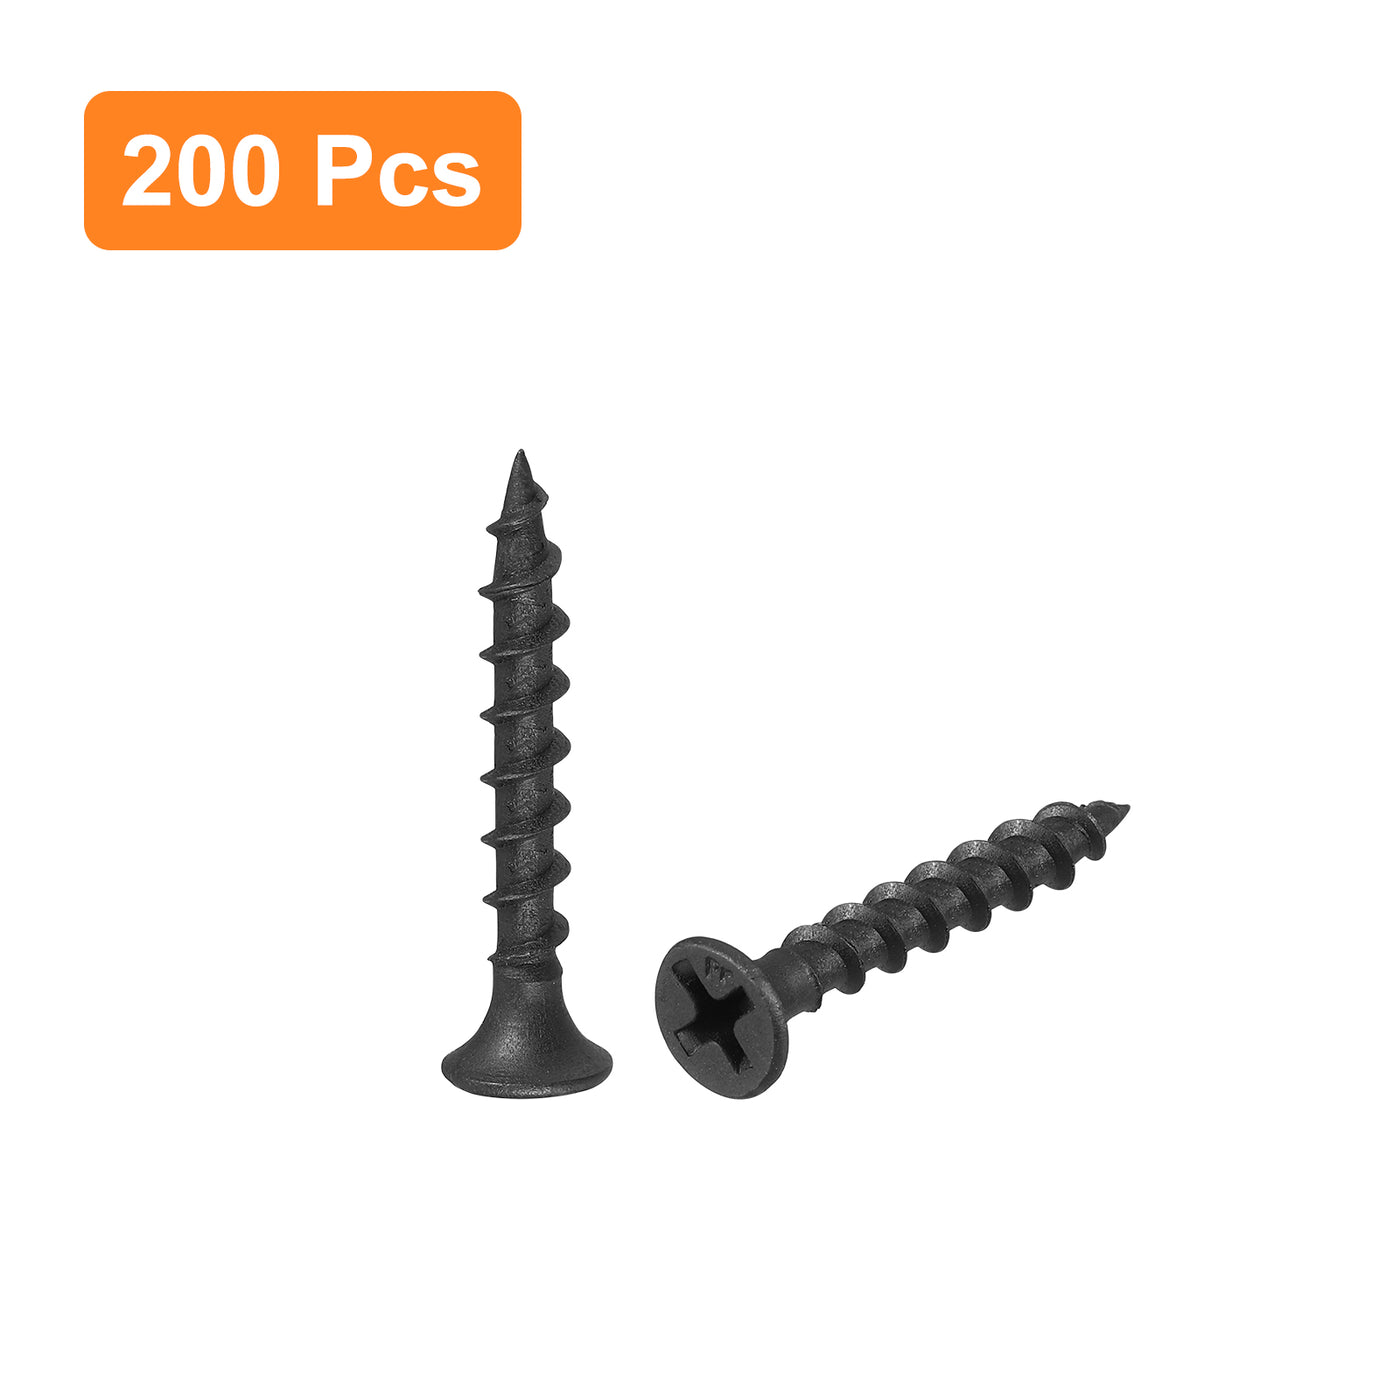 uxcell Uxcell M3.8x30mm 200pcs Phillips Drive Wood Screws, Carbon Steel Self Tapping Screws